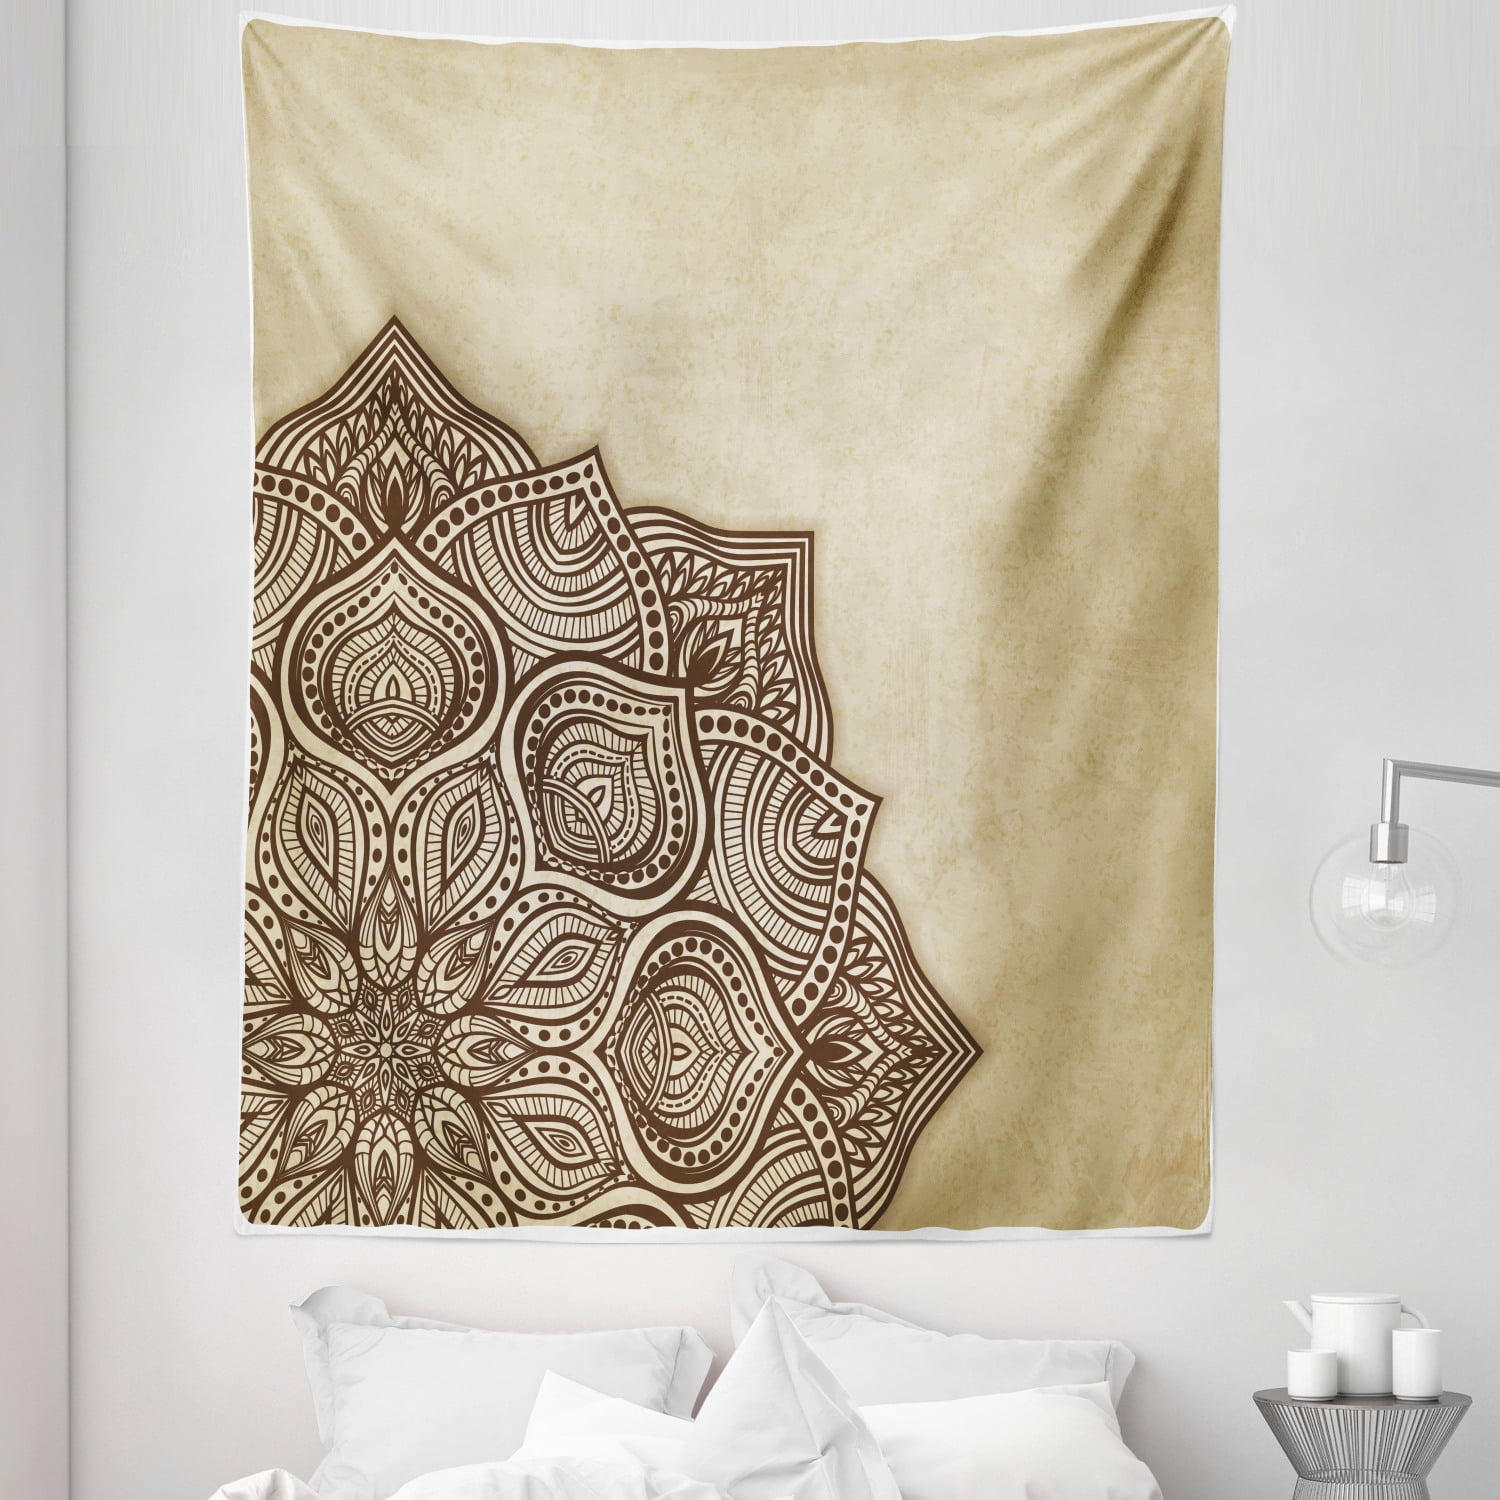 Mandala Tapestry Wall Hanging Tapestry for Bedroom Living Room Dormitory Wall Decor 130x150 cm 51.2x59.1 inches 